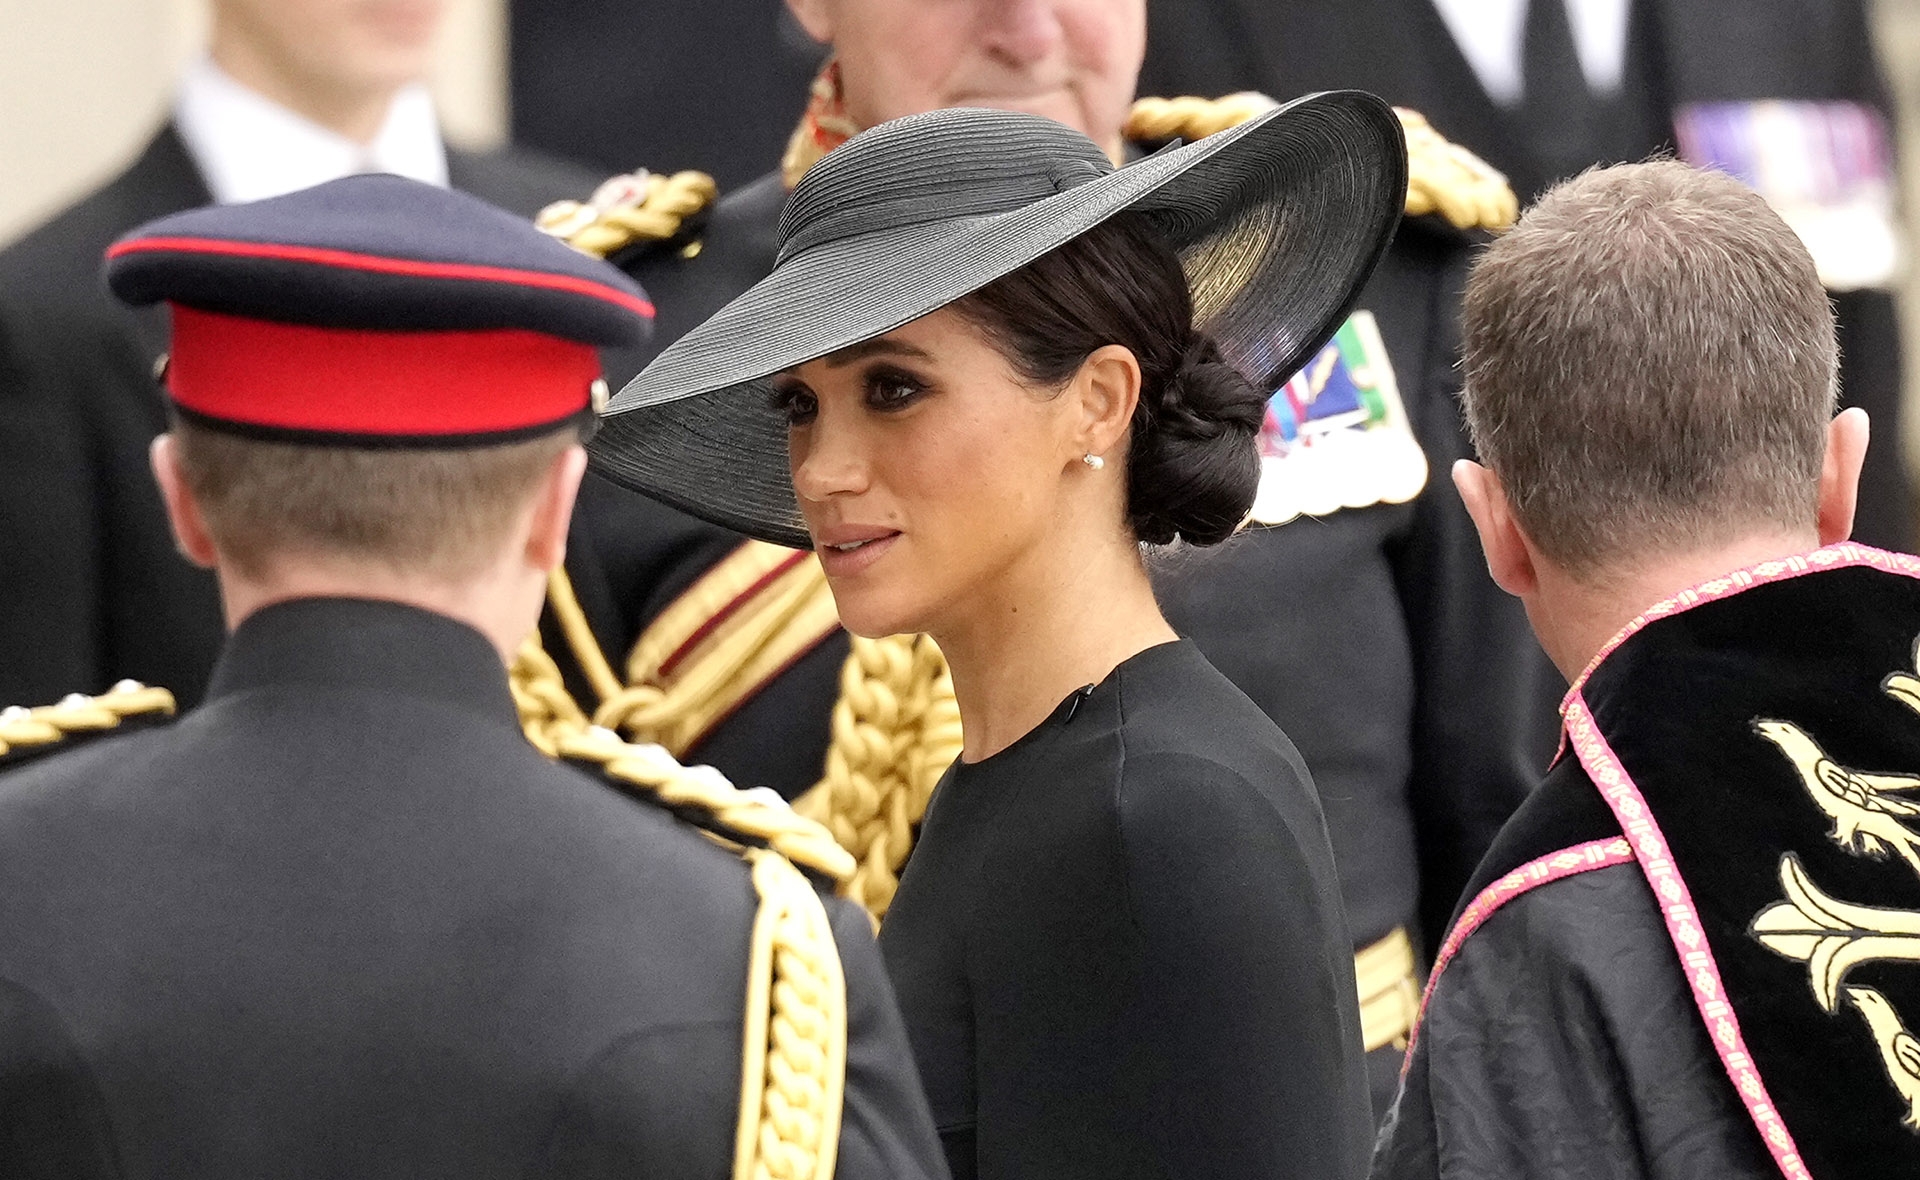 Prince Harry and Meghan Markle turn heads as they arrive at Queen’s Funeral